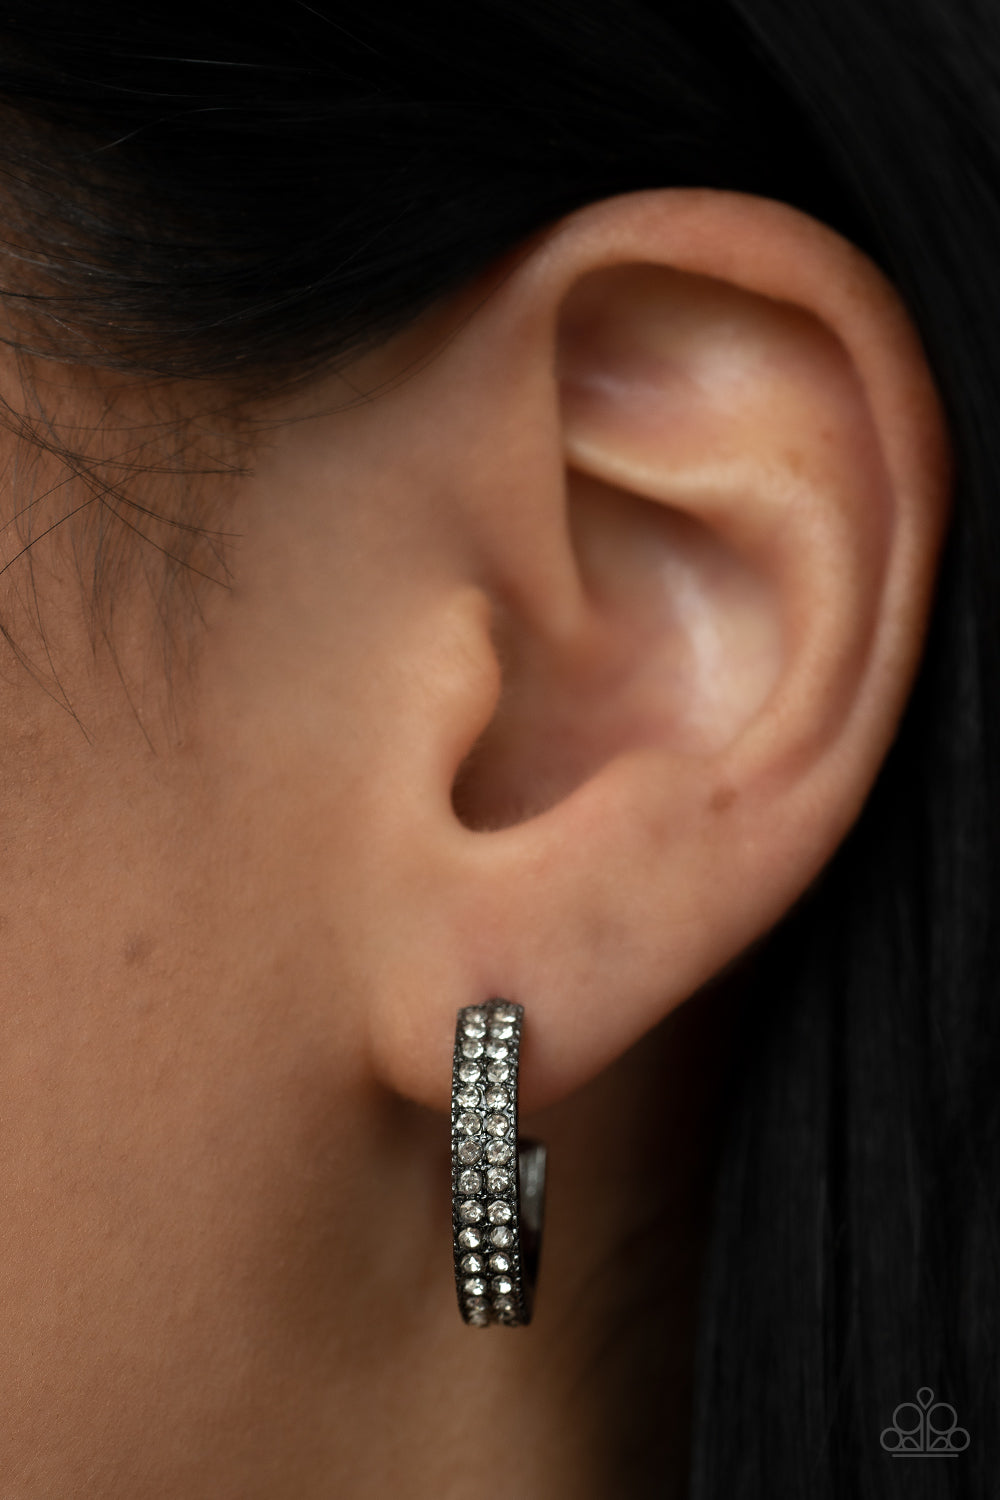 Small Town Twinkle - Black Dainty Hoop Earrings two rows of glassy white rhinestones encrust the front of a dainty gunmetal hoop, resulting in a timeless twinkle. Earring attaches to a standard post fitting. Hoop measures approximately 3/4" in diameter.  Sold as one pair of hoop earrings.